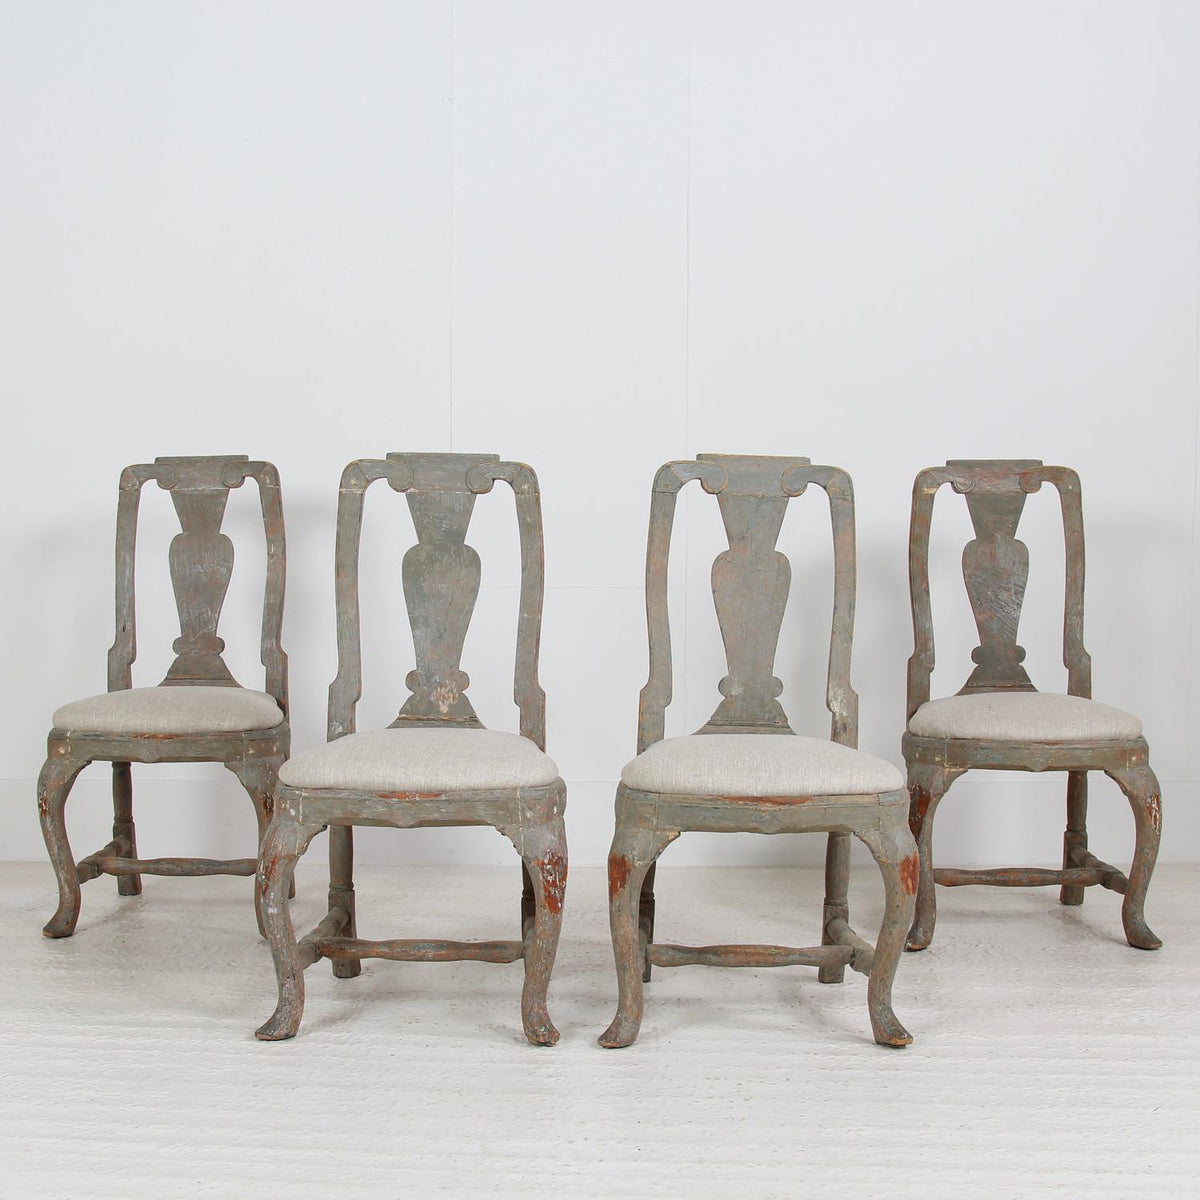 Set of Four Swedish Rococo  18thC Period  Dining Chairs Scraped to Original Paint